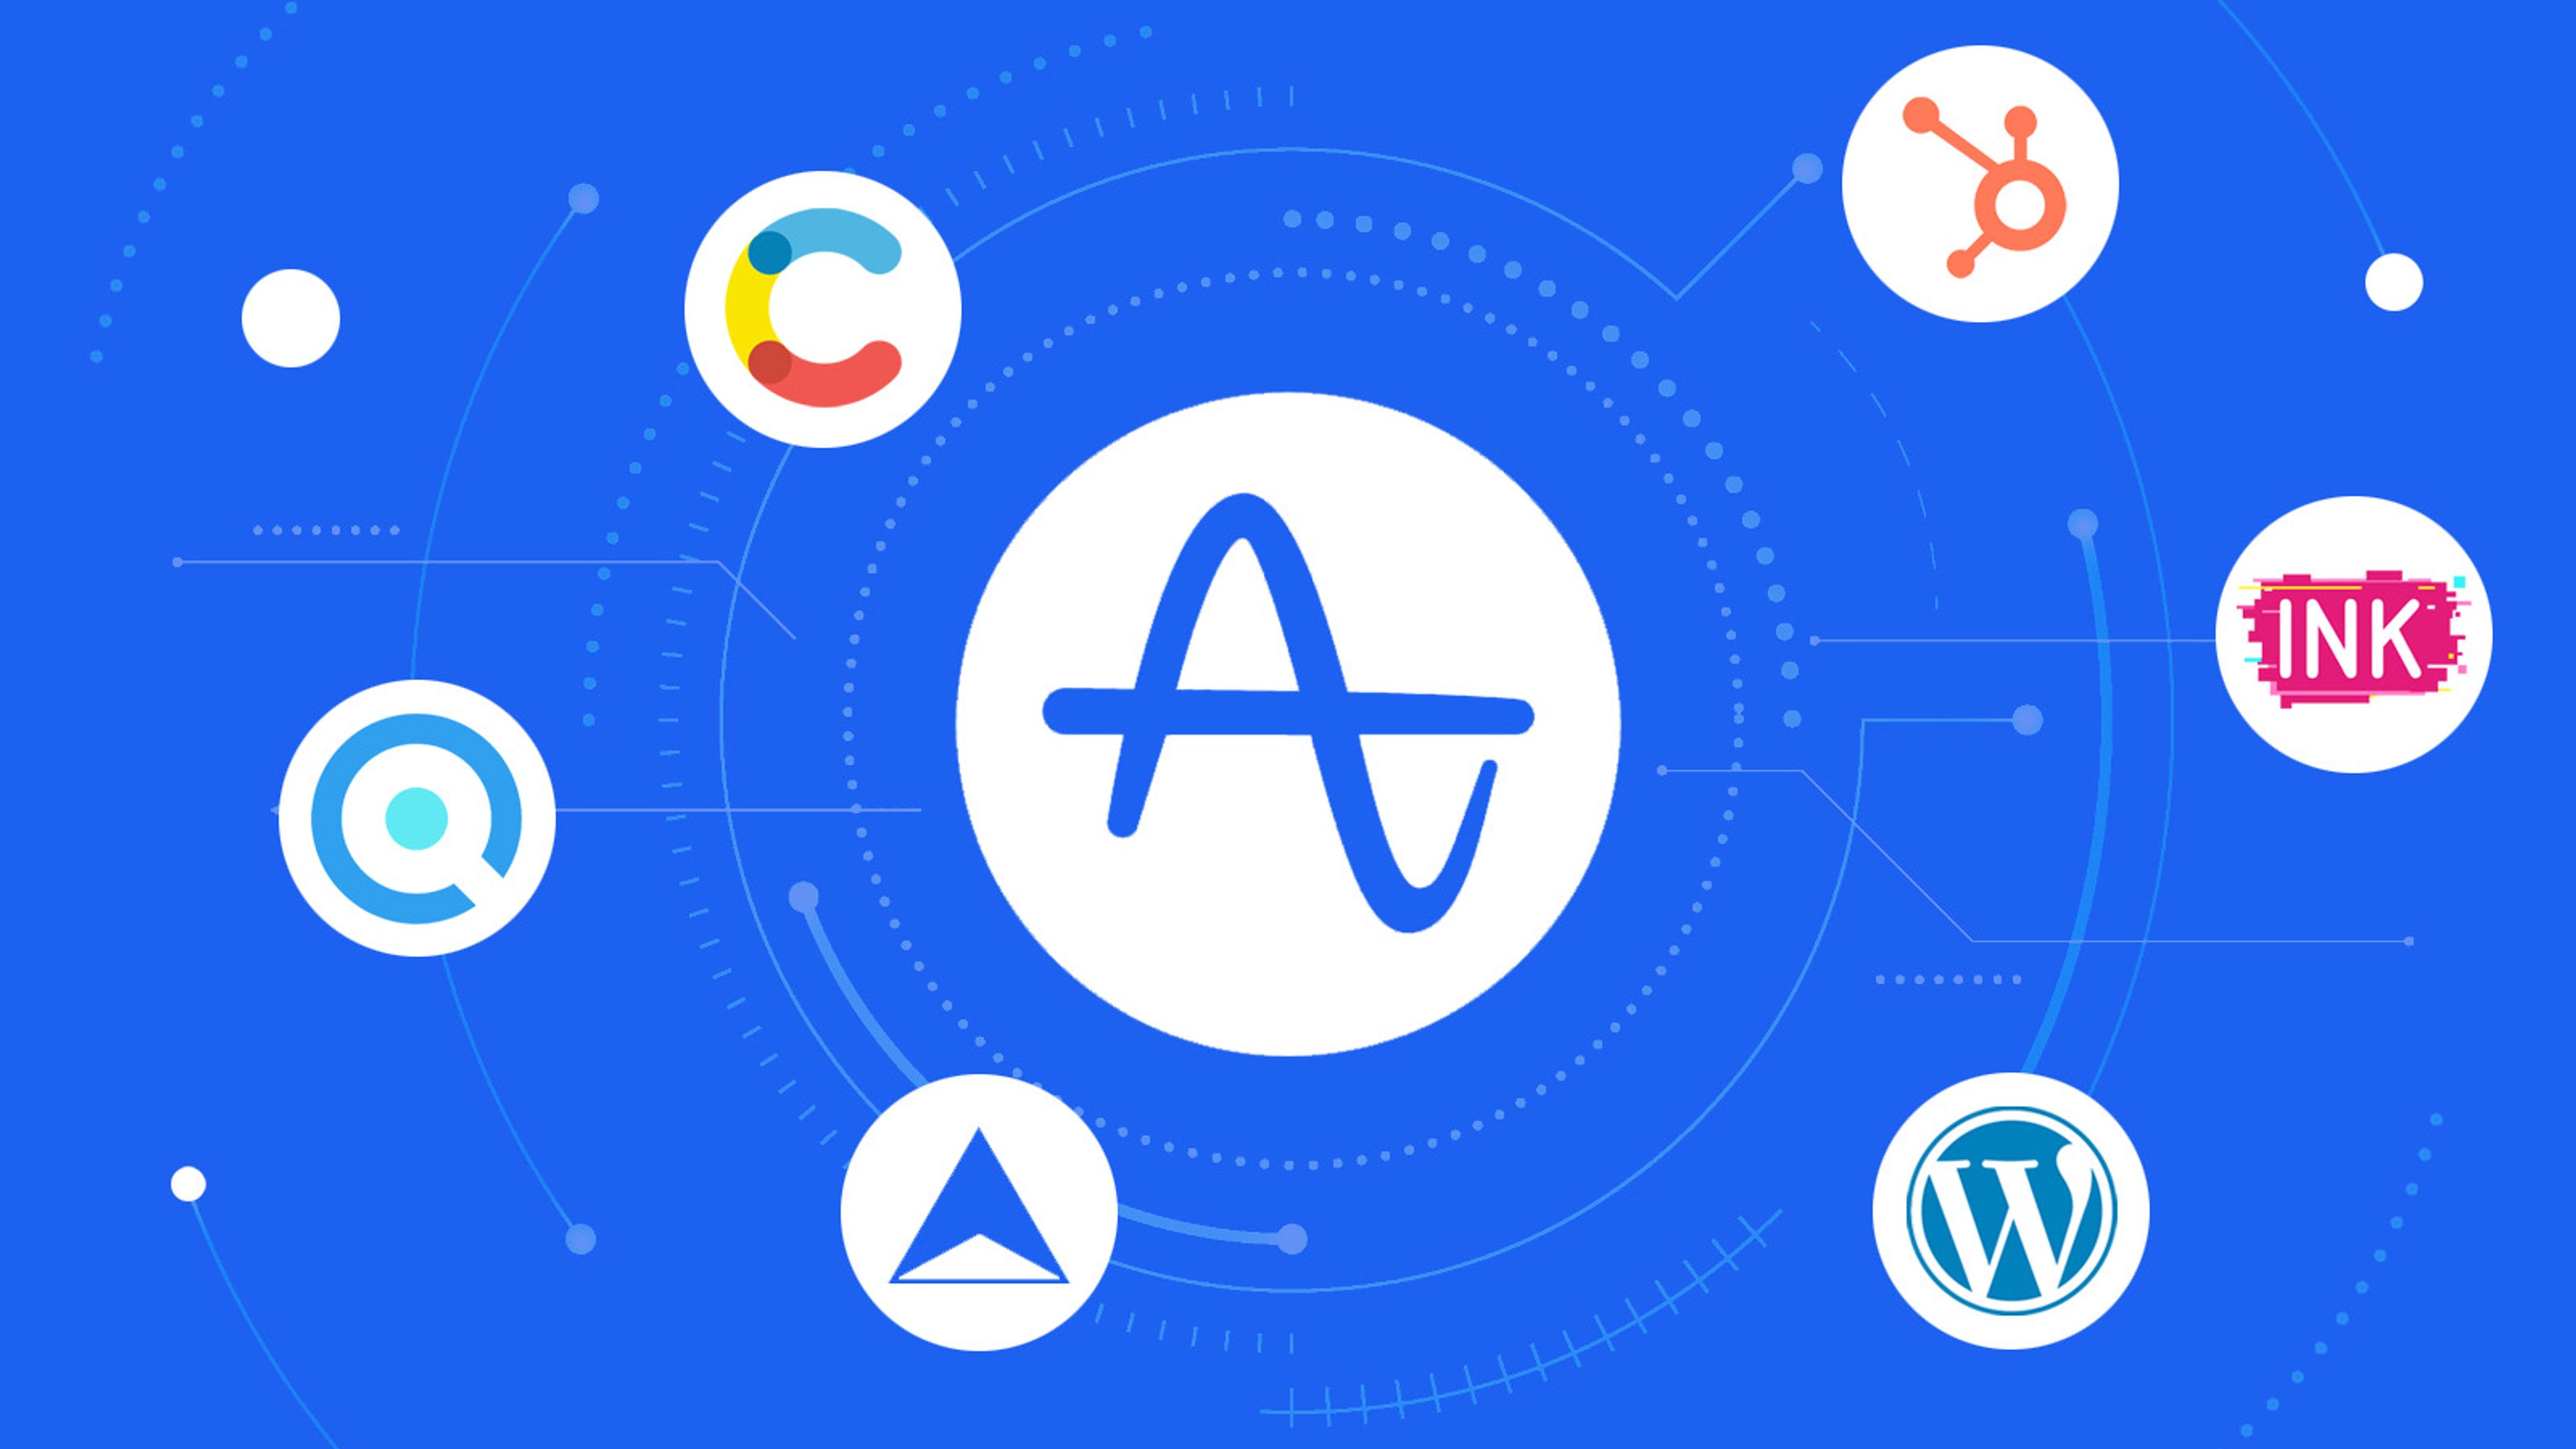 Amplitude logo surrounded by logos of Contentful, HubSpot, unitQ, Humanic.ai, WordPress, and Movable Ink